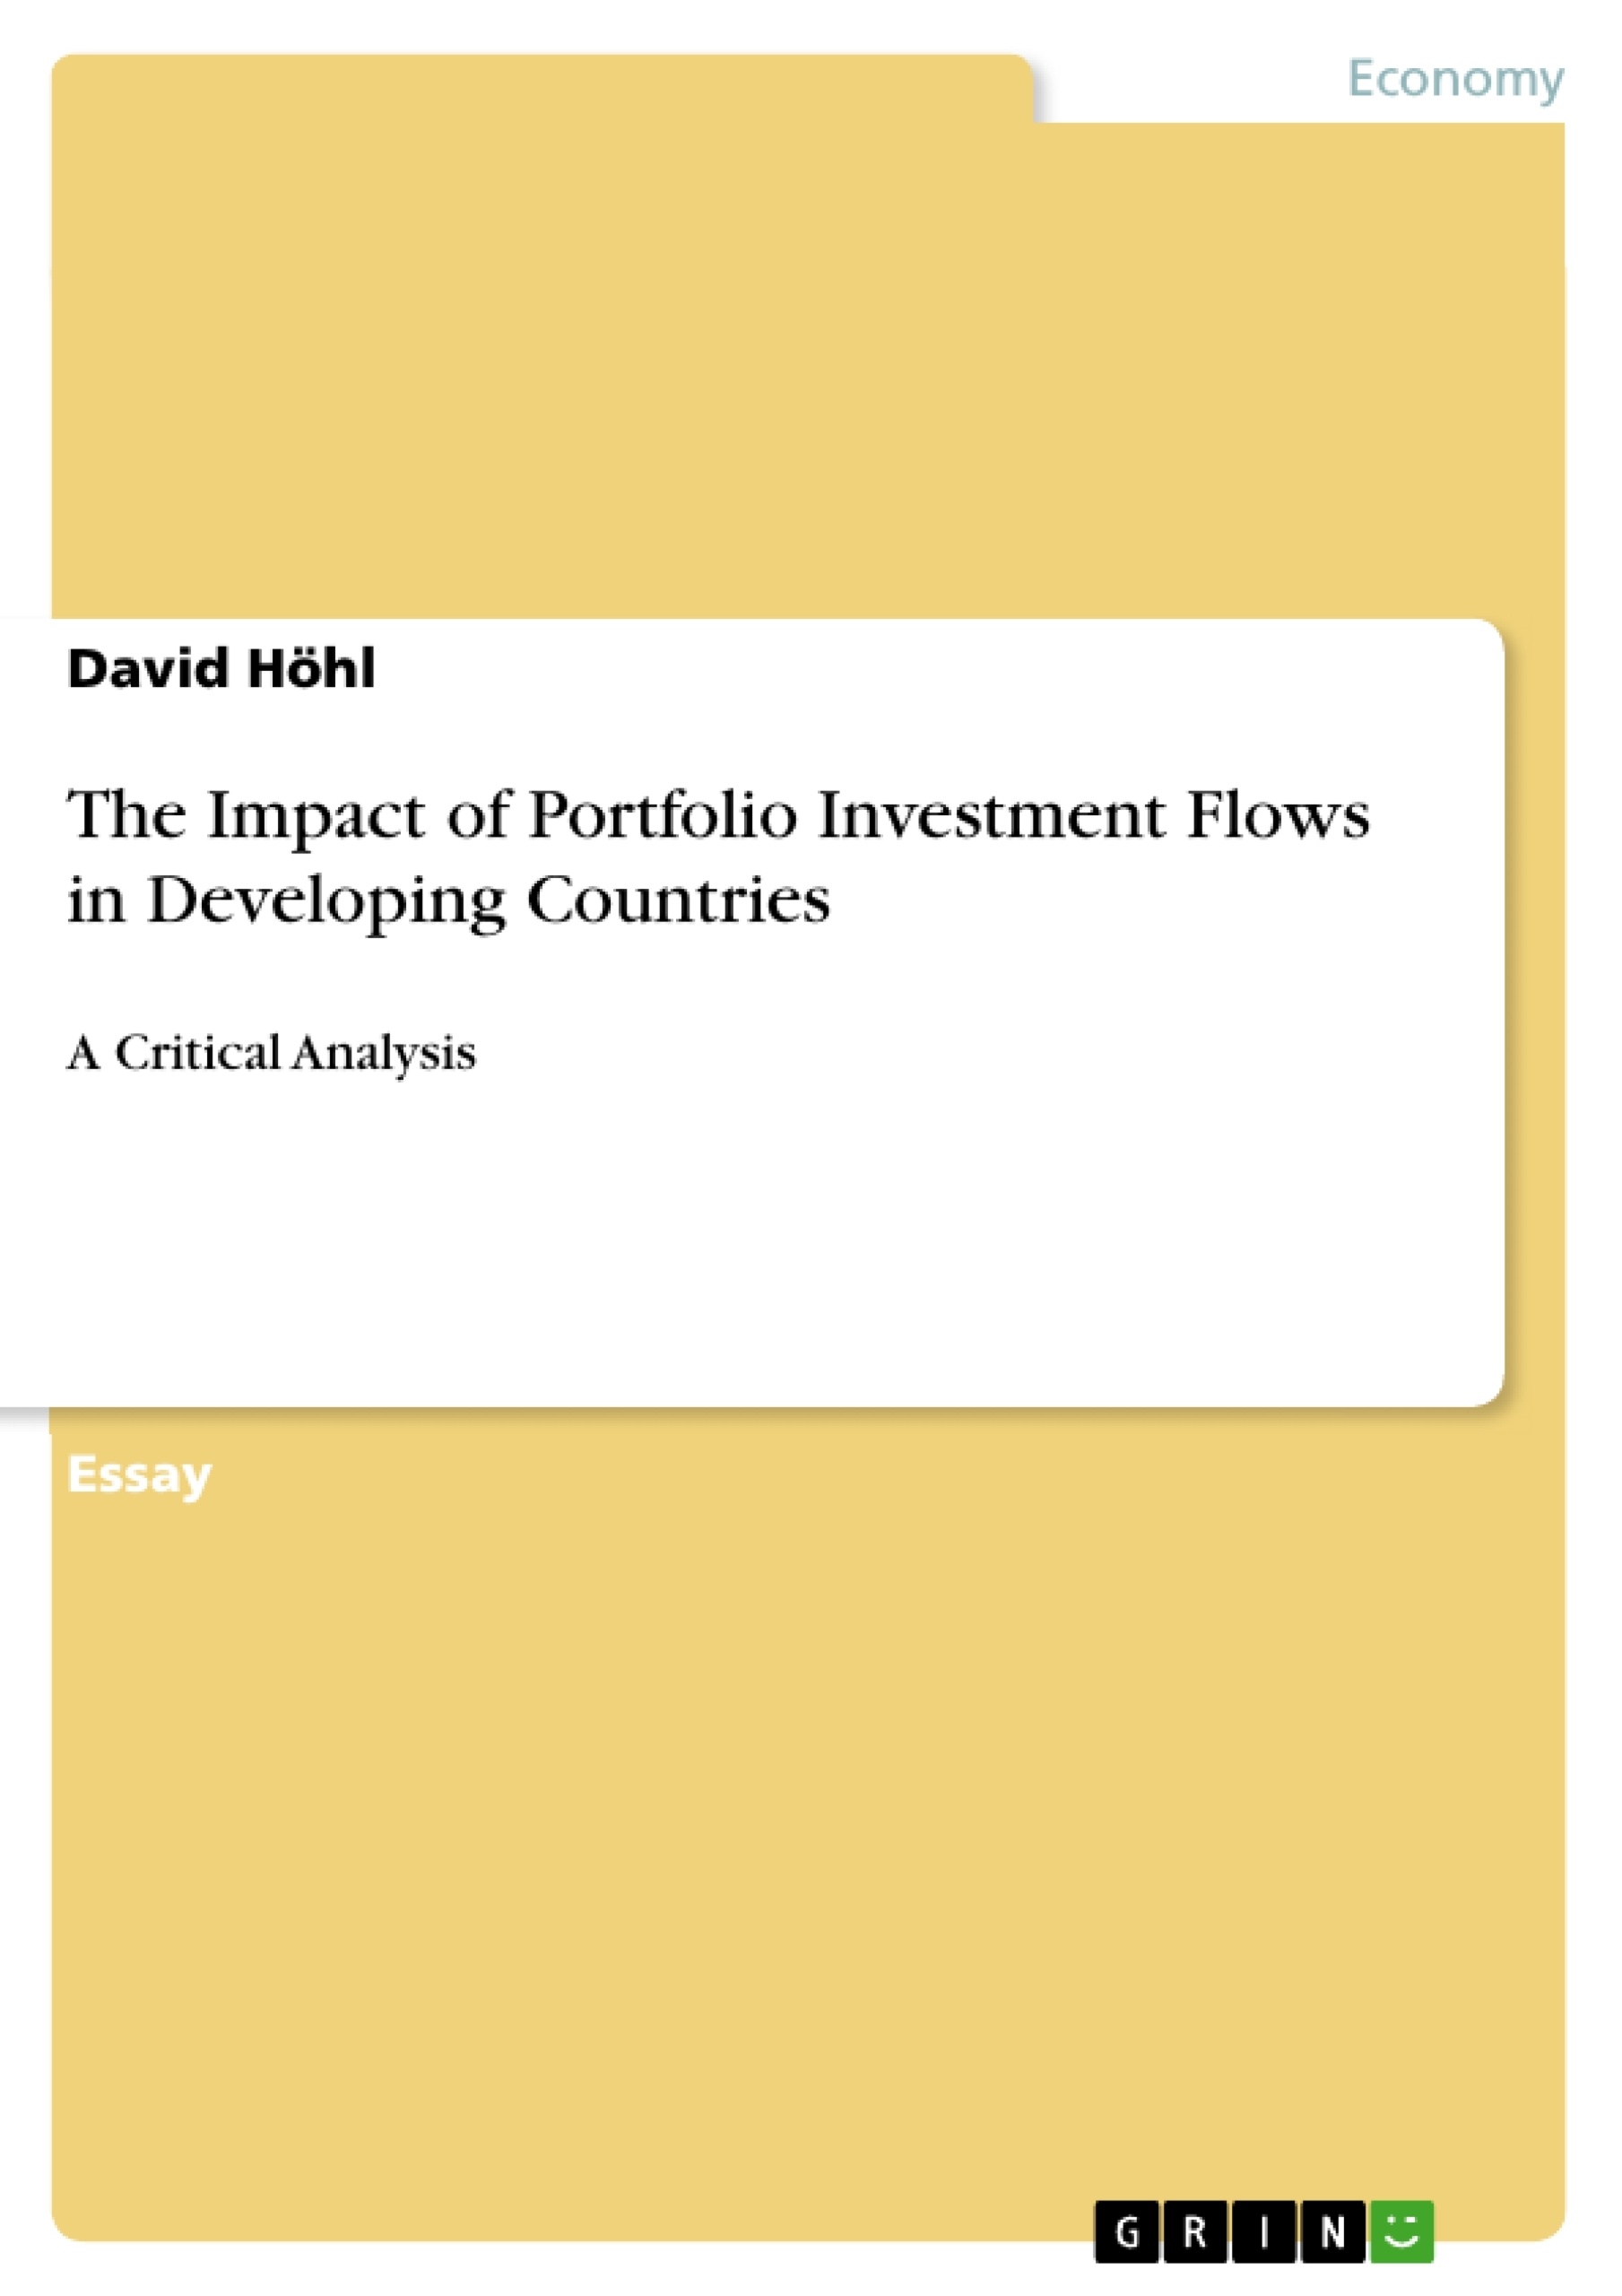 Title: The Impact of Portfolio Investment Flows in Developing Countries